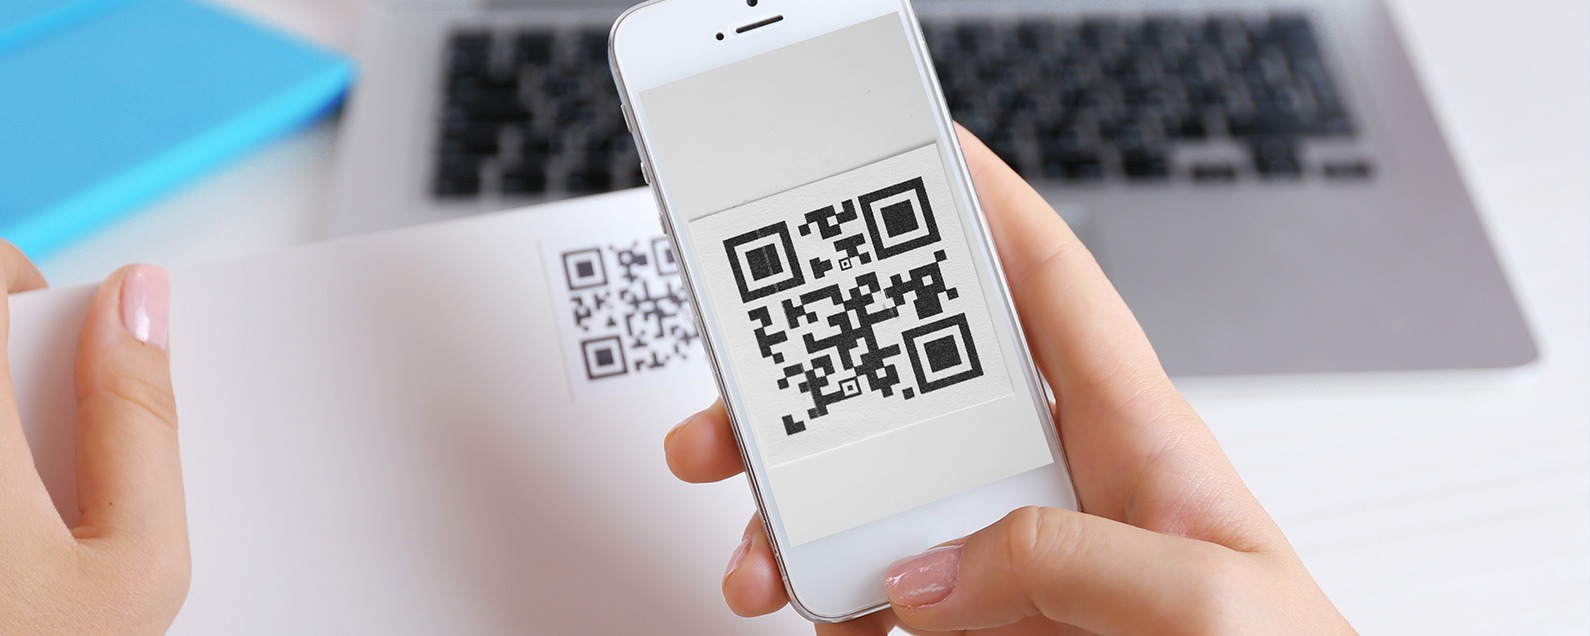 5 best QR Code scanner apps leading the pack in 2019